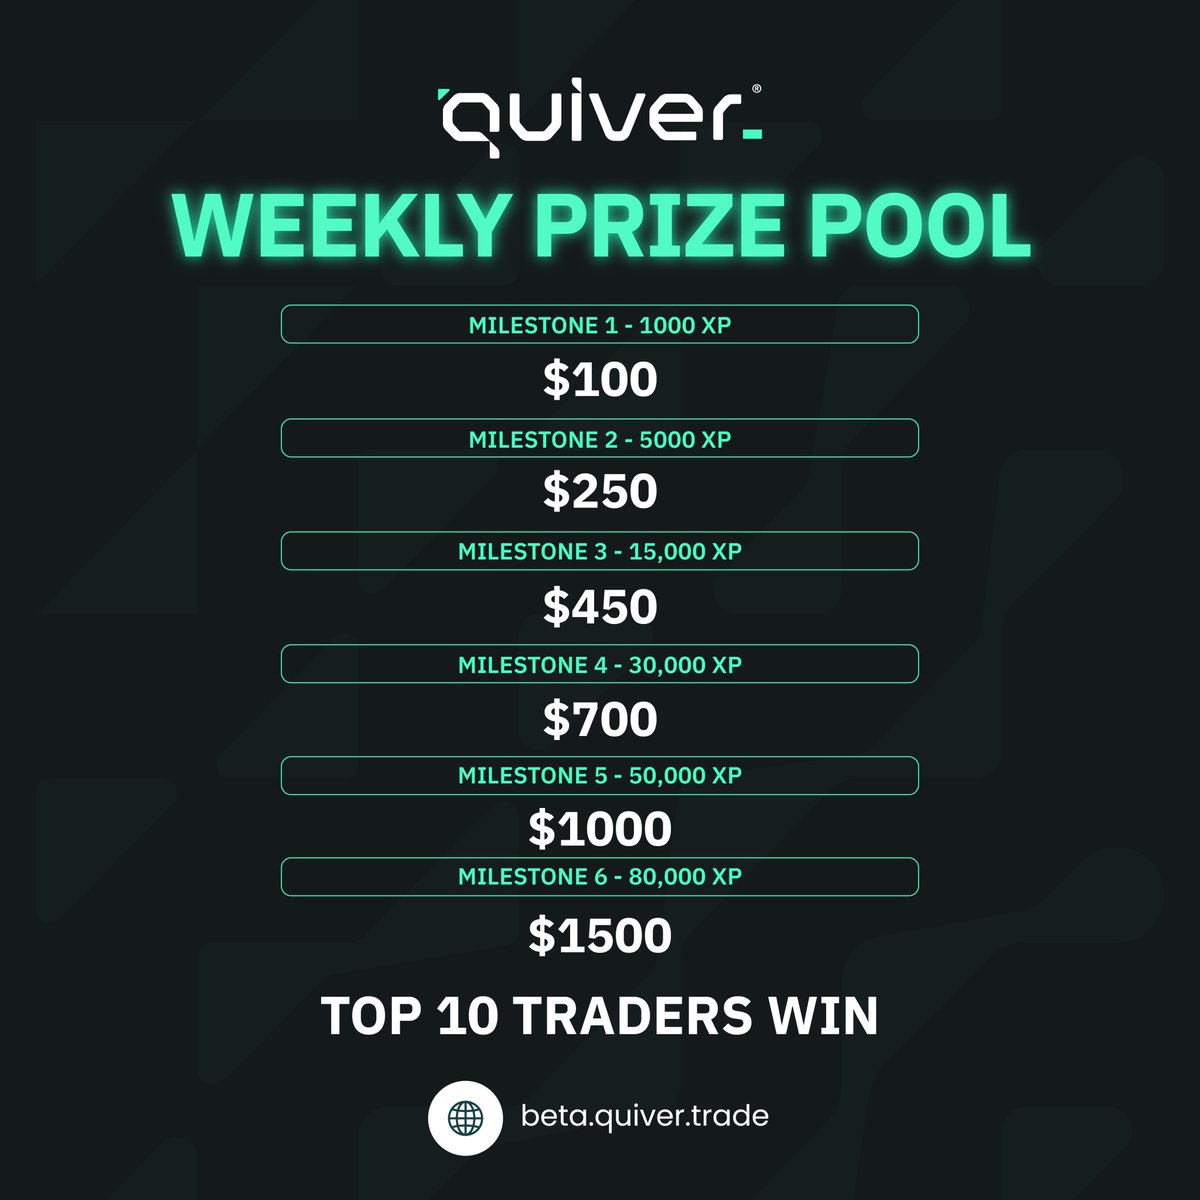 Trading Tournament 2.0 Live Now ✅ Up to $13,000 in prizes 💰🎁 Top 10 Traders paid weekly and monthly 🏆 Join now on quiver.trade 🚀